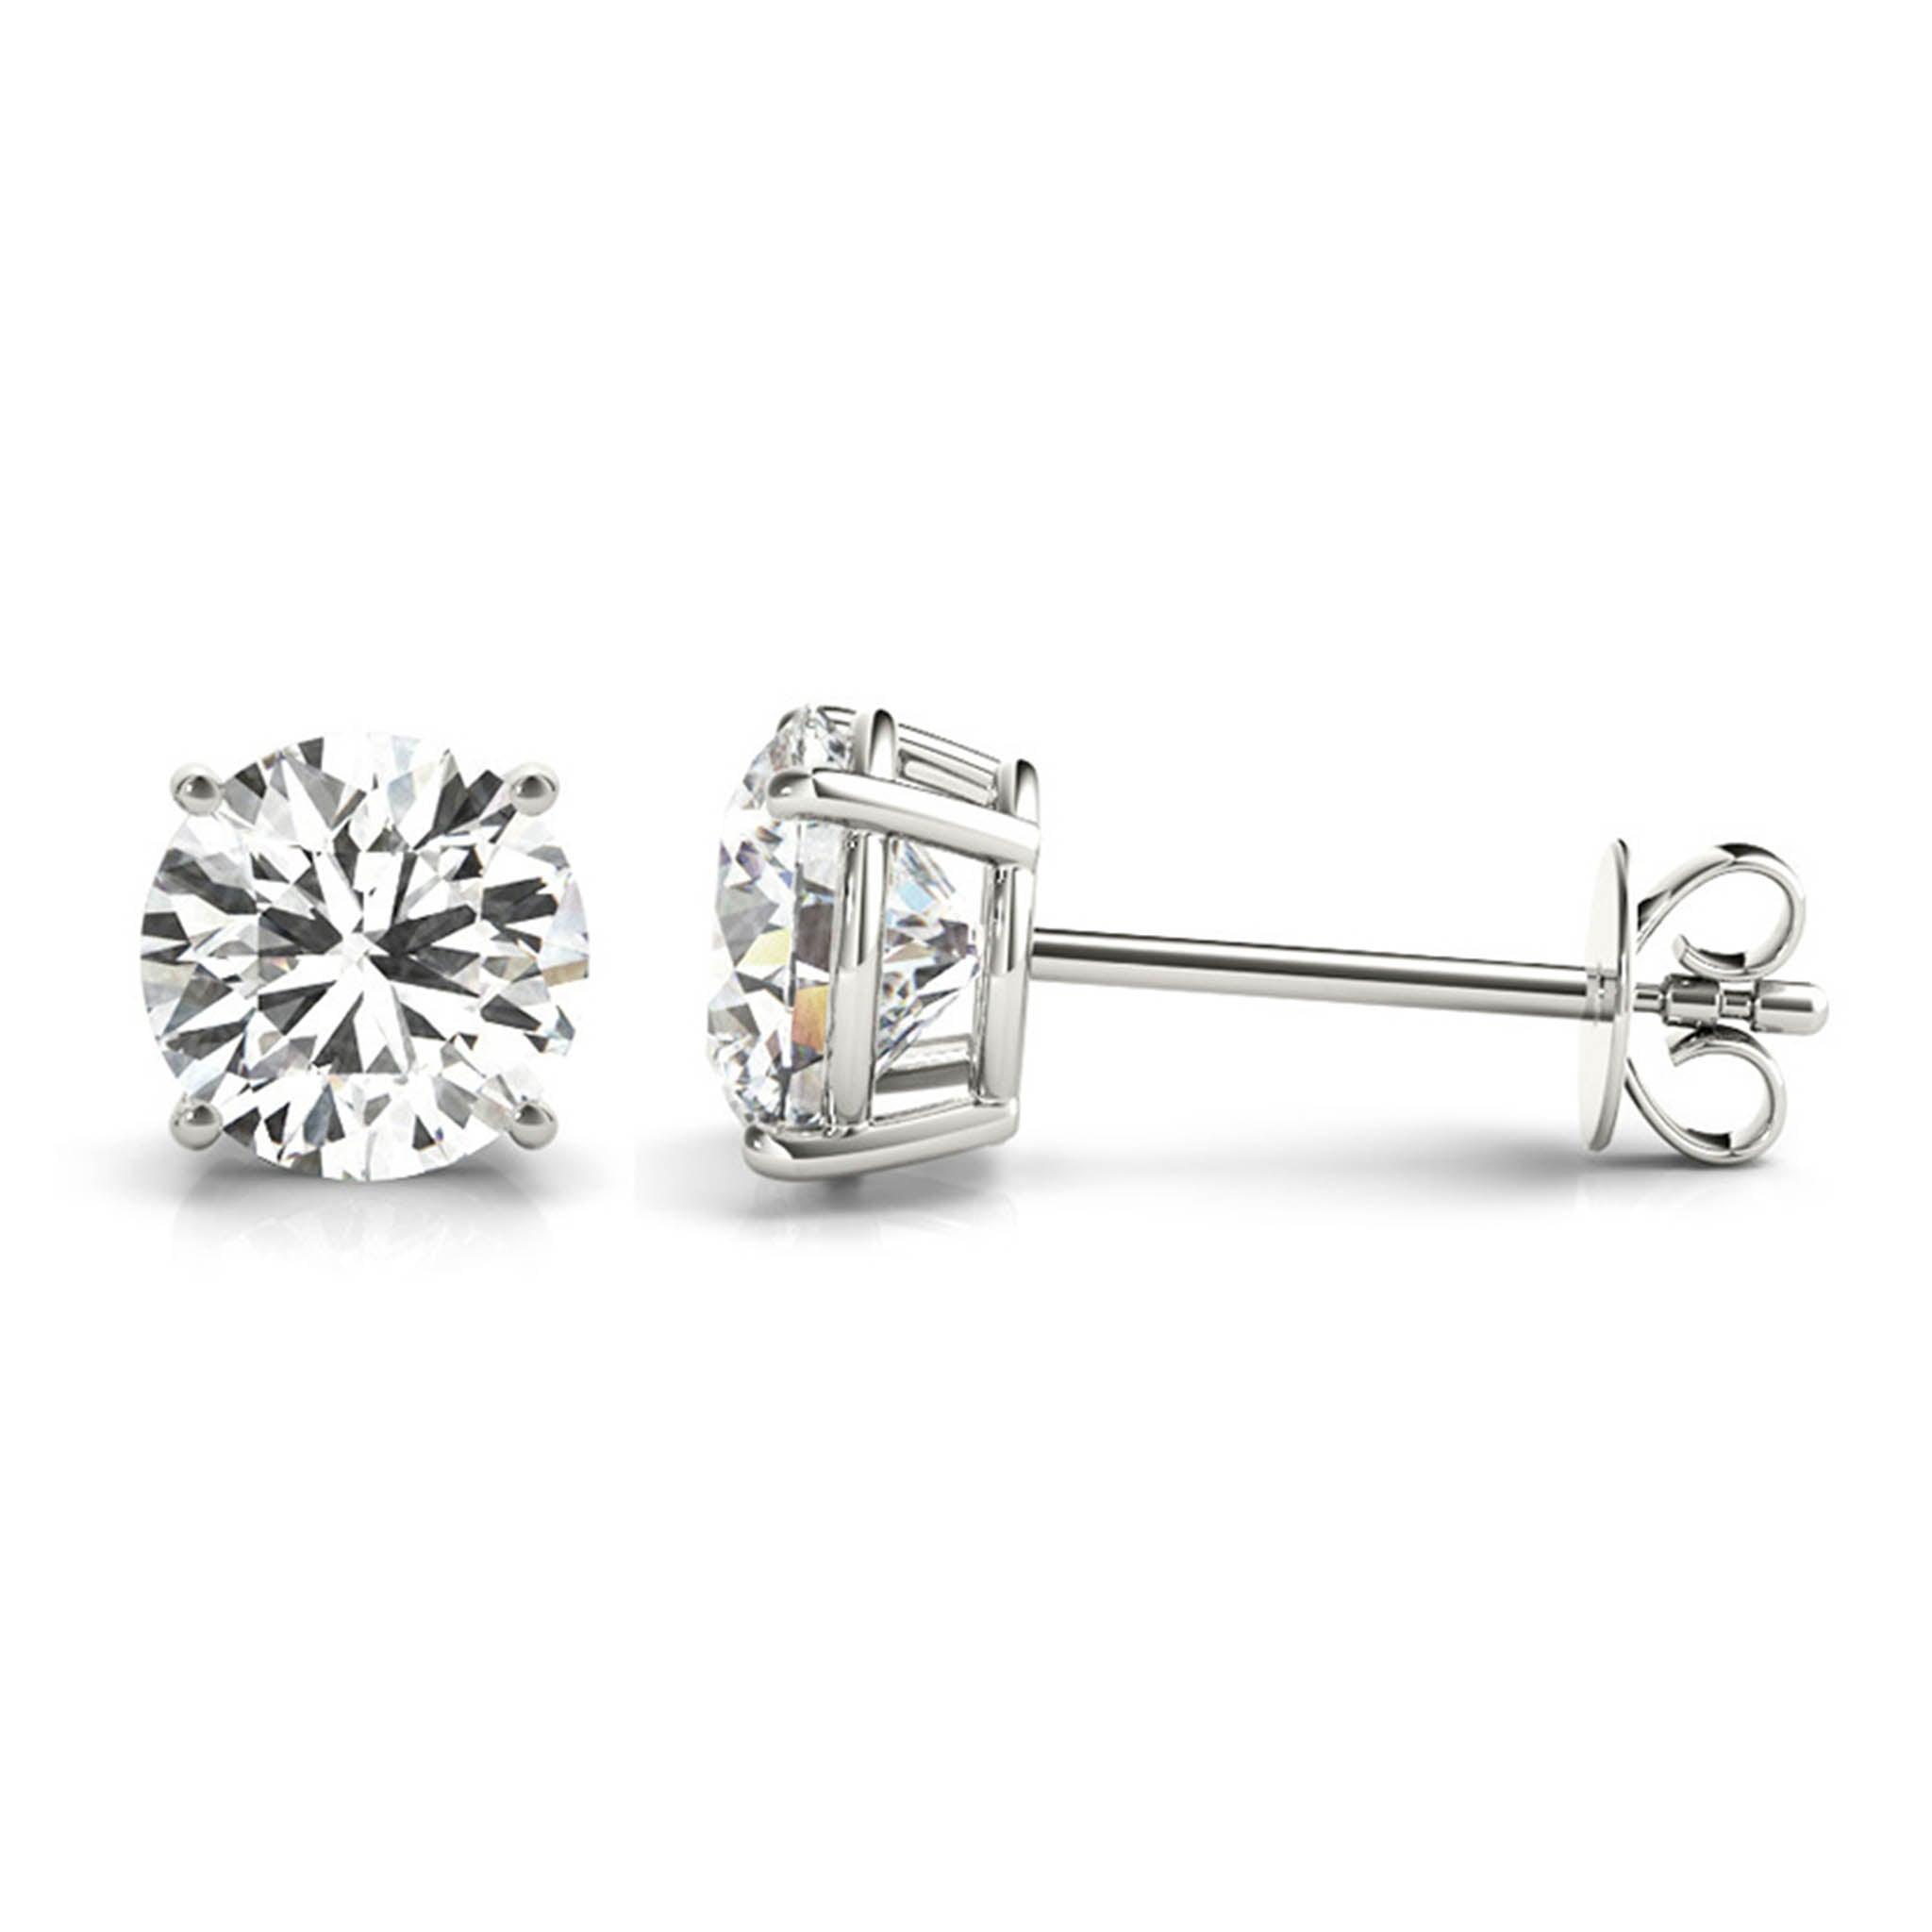 Zoey 1.50 Carat Lab Grown Diamond Ear Studs / Earrings.  Total diamond weight 1.50 carats.  4 claw setting. 14ct white gold version. 